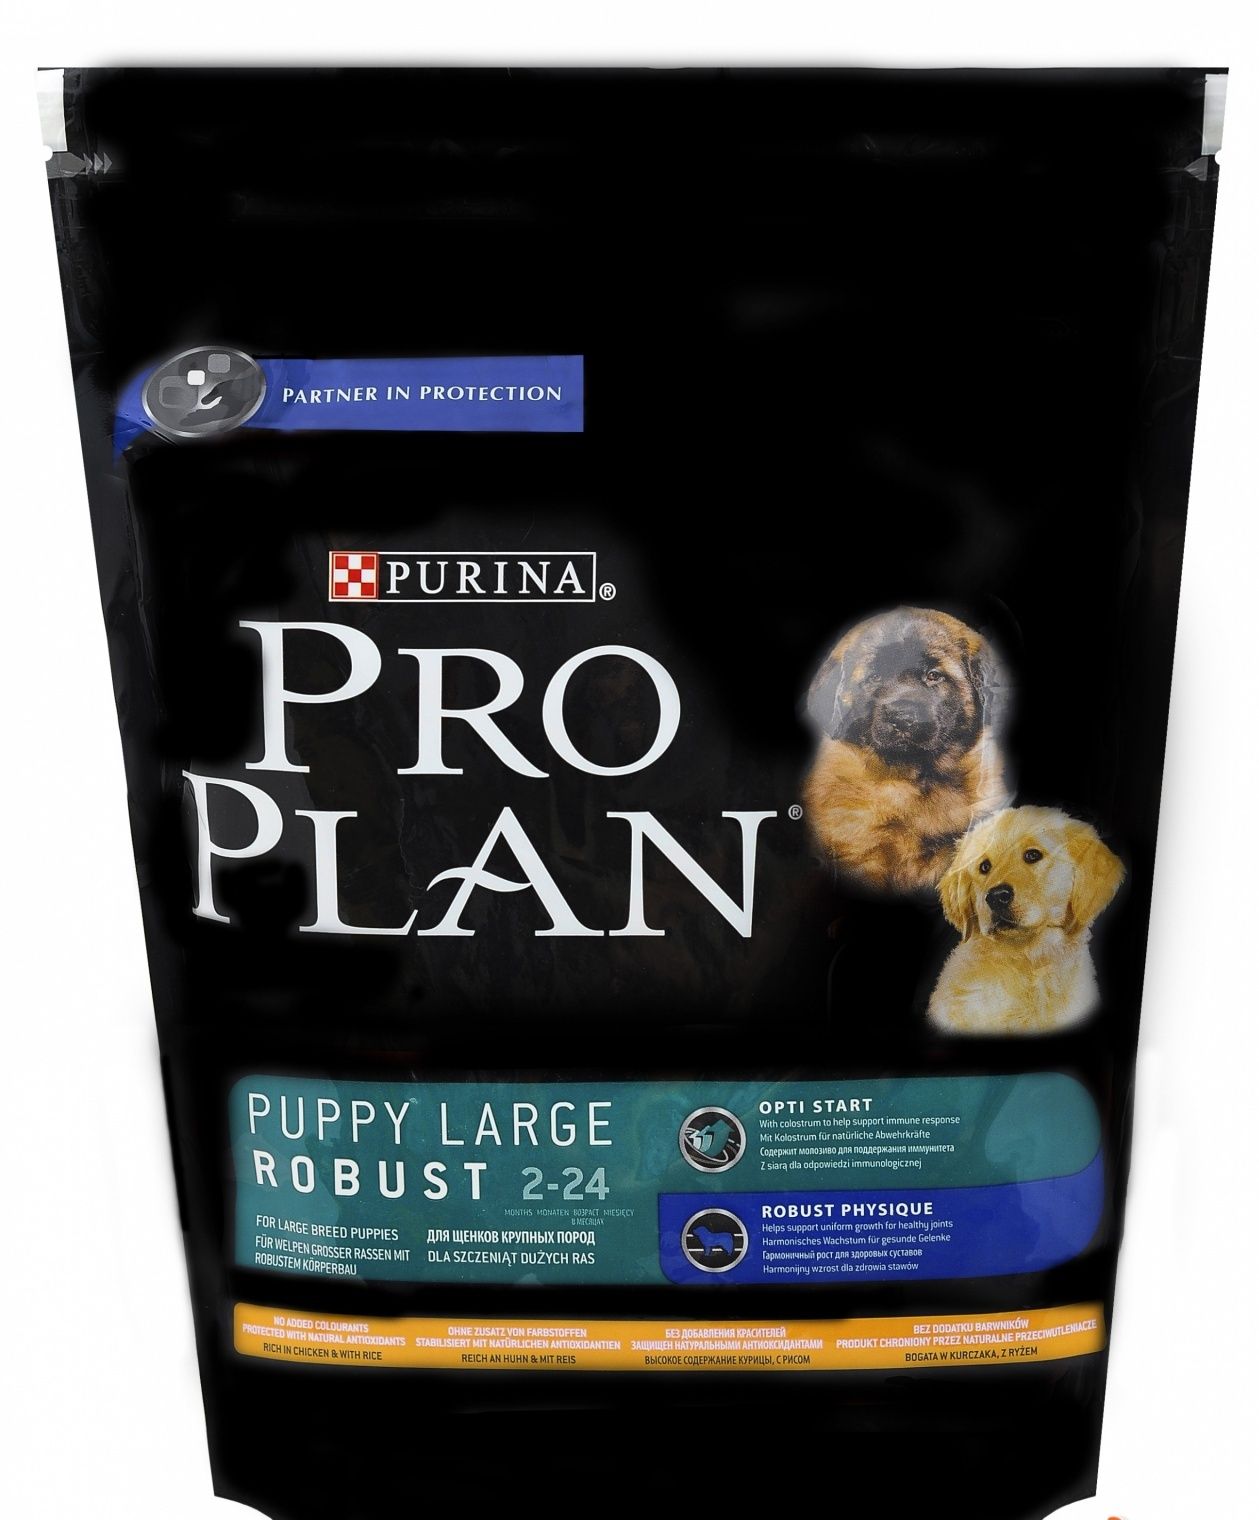  ProPlan Puppy Large Robust    ,    3 - PURINA - PURINA <br><br><br>  (): 3<br>: 12150303<br>: PURINA<br>: <br>-: <br>  (): 3<br>/: <br>: <br> : 